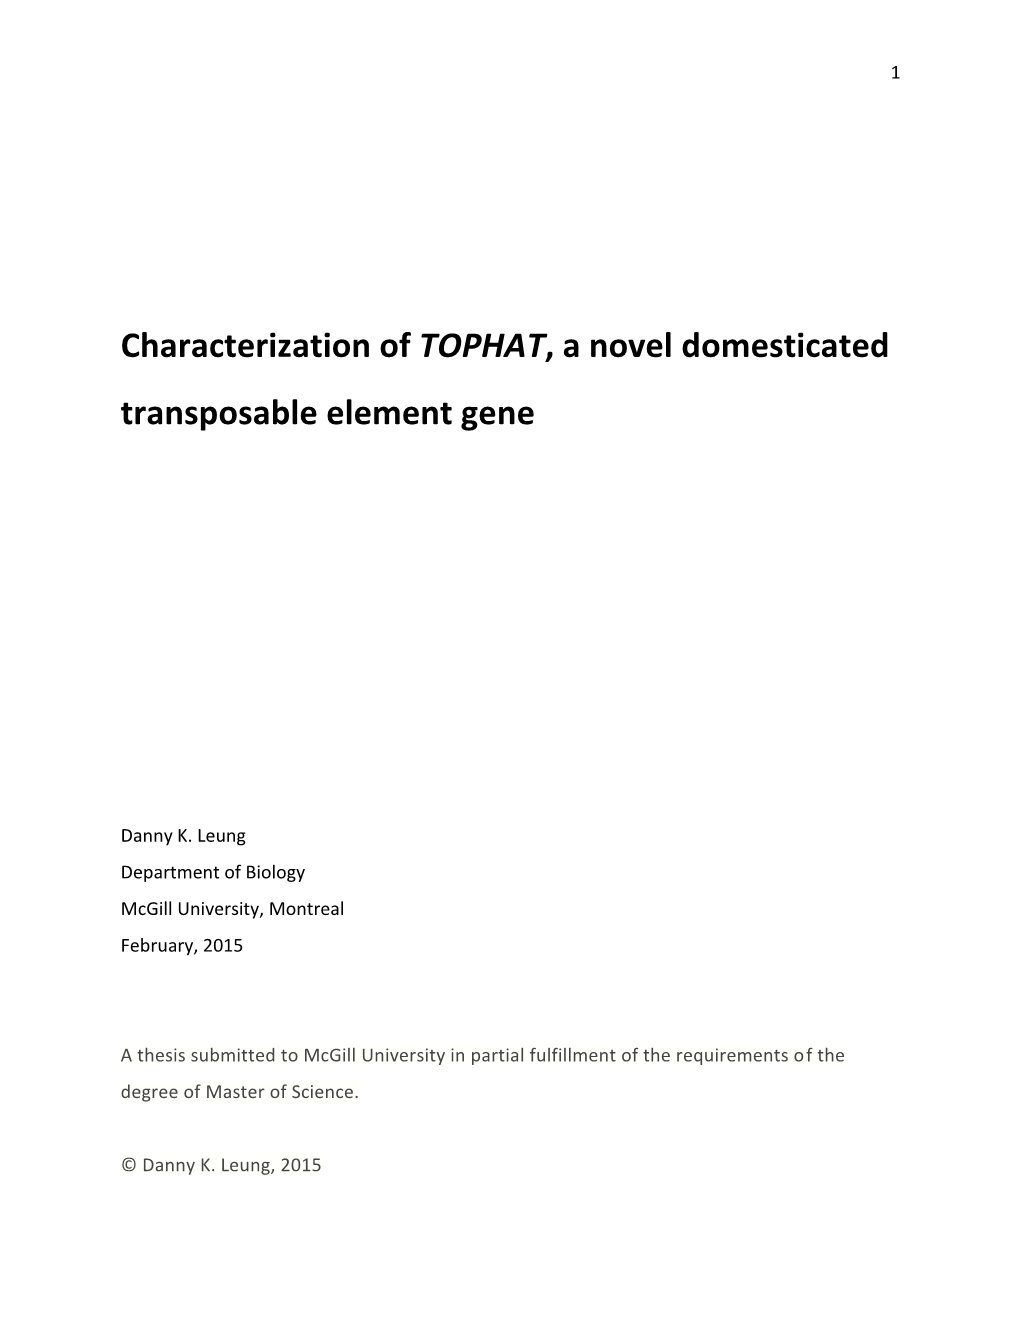 Characterization of TOPHAT, a Novel Domesticated Transposable Element Gene